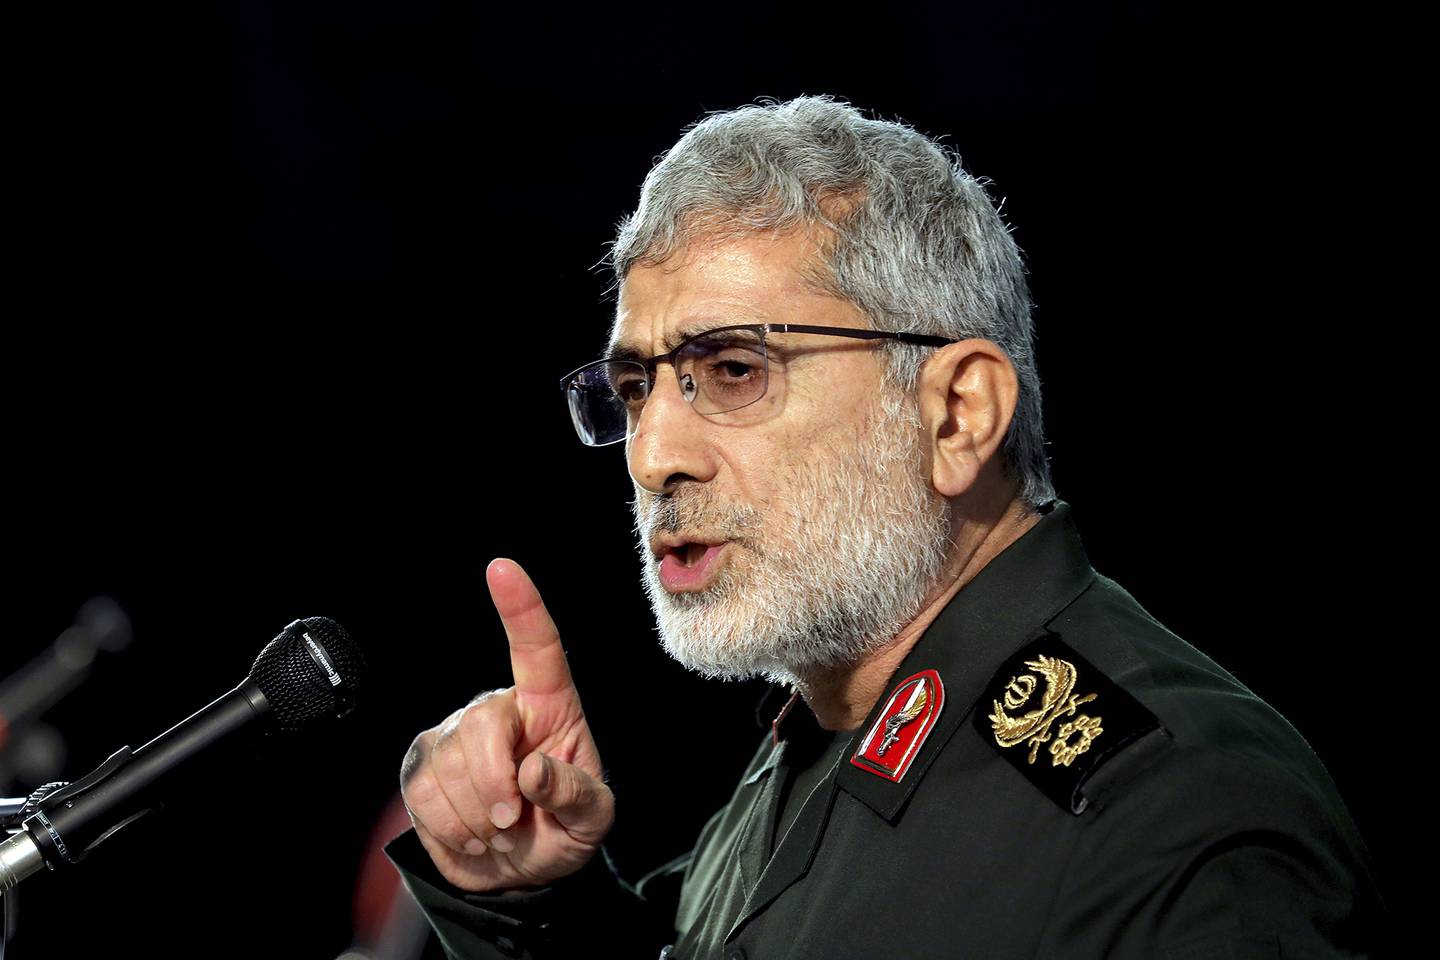 Gen. Esmail Ghaani, the head of the Quds Force, speaks during a ceremony on the occasion of first anniversary of the death of the force's previous head Gen. Qassem Soleimani, in Tehran, Iran, Friday, Jan. 1, 2021.